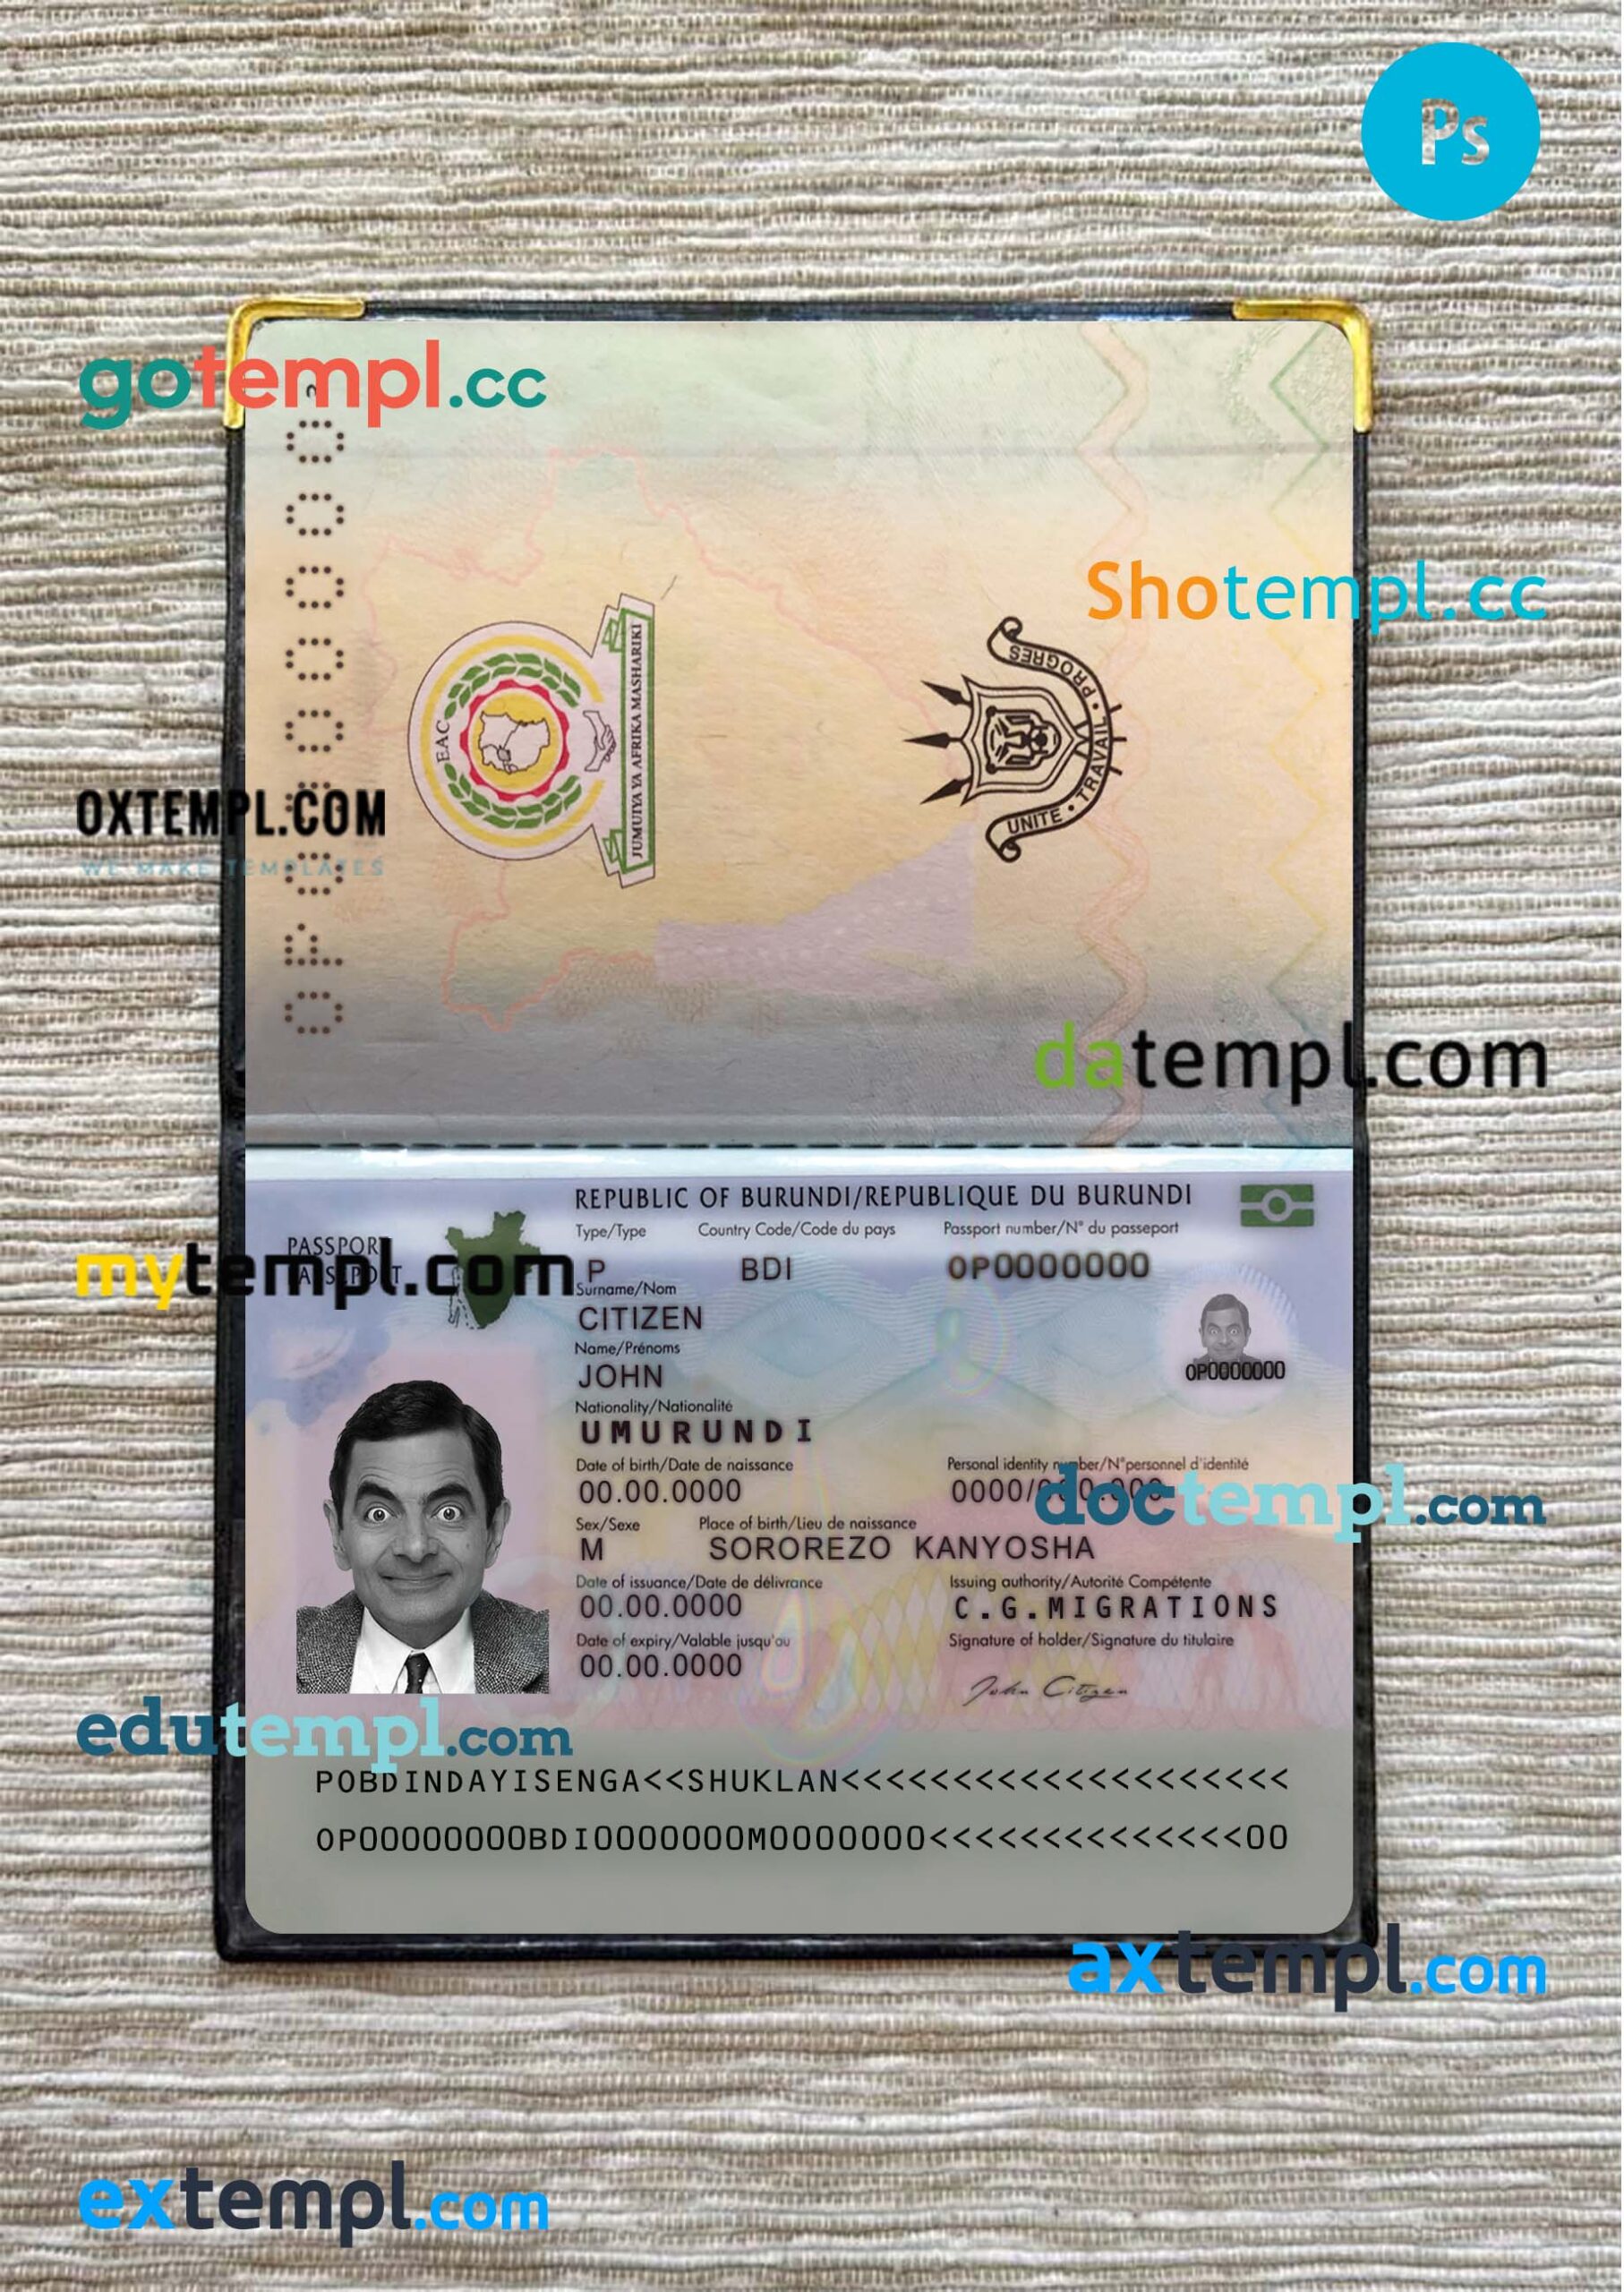 Burundi passport PSD files, scan and photograghed image (2019-present), 2 in 1